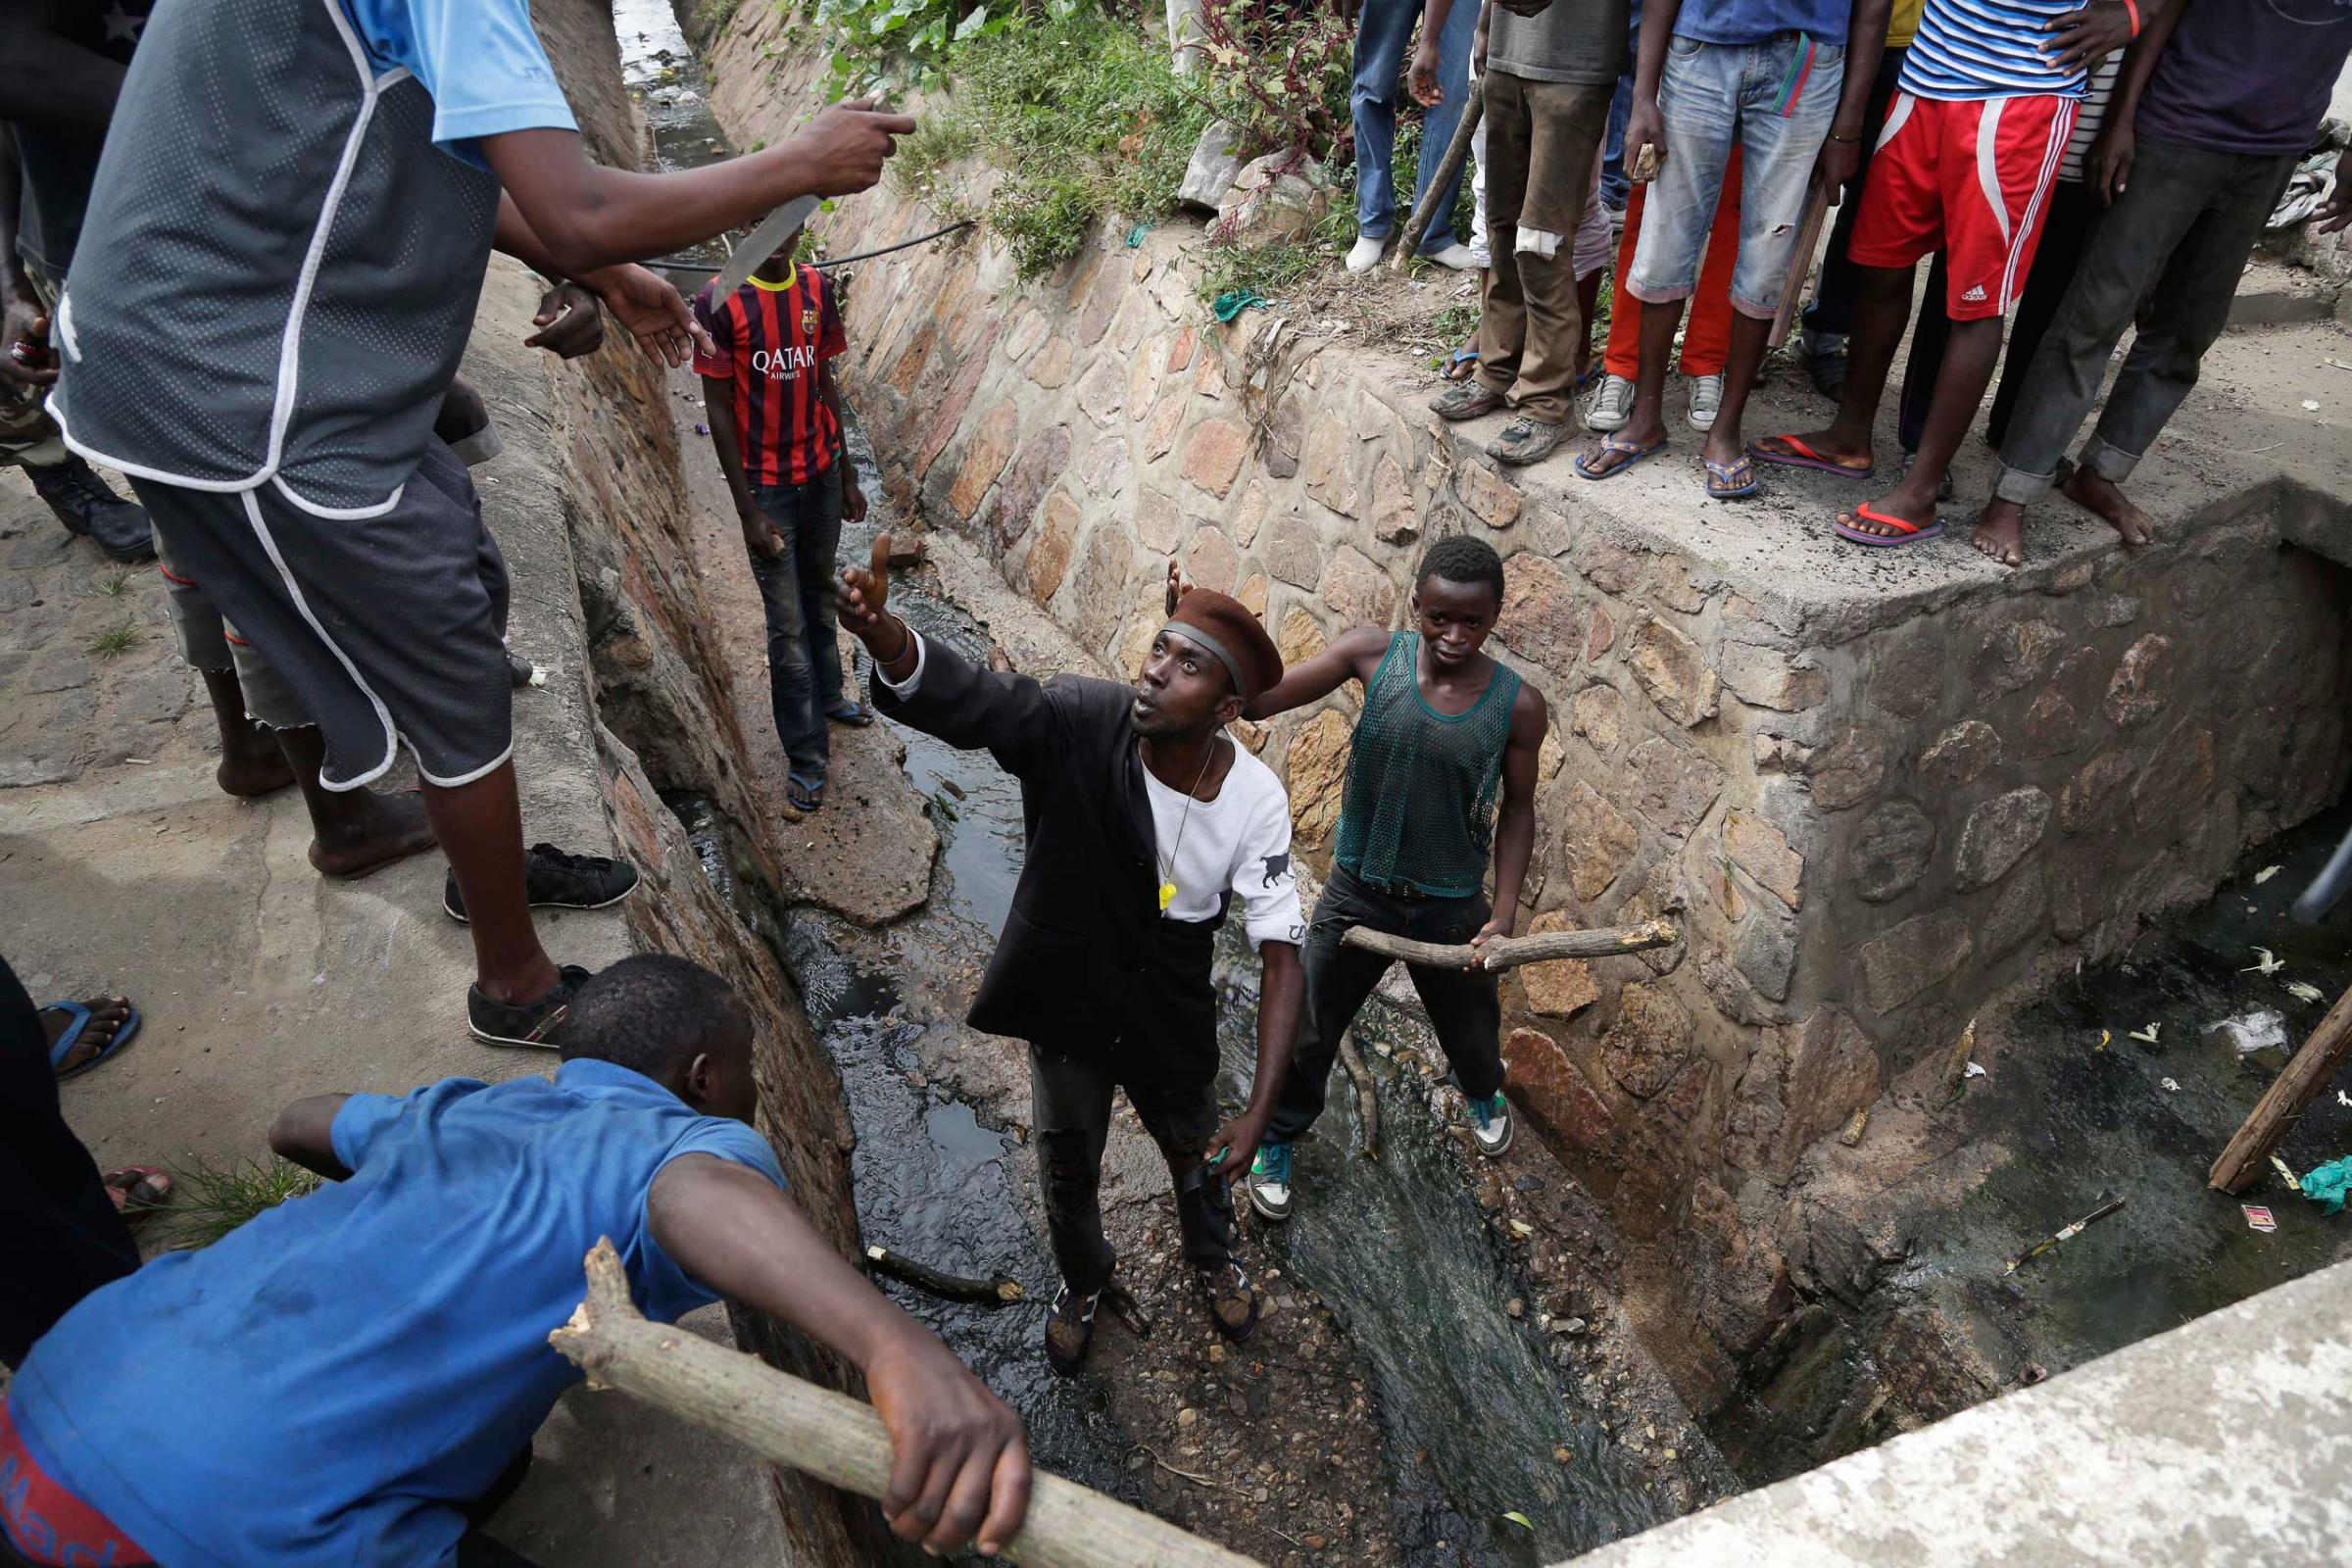 Demonstrators prepare to flush out Niyonzima who escaped a lynching by escaping into a sewer.